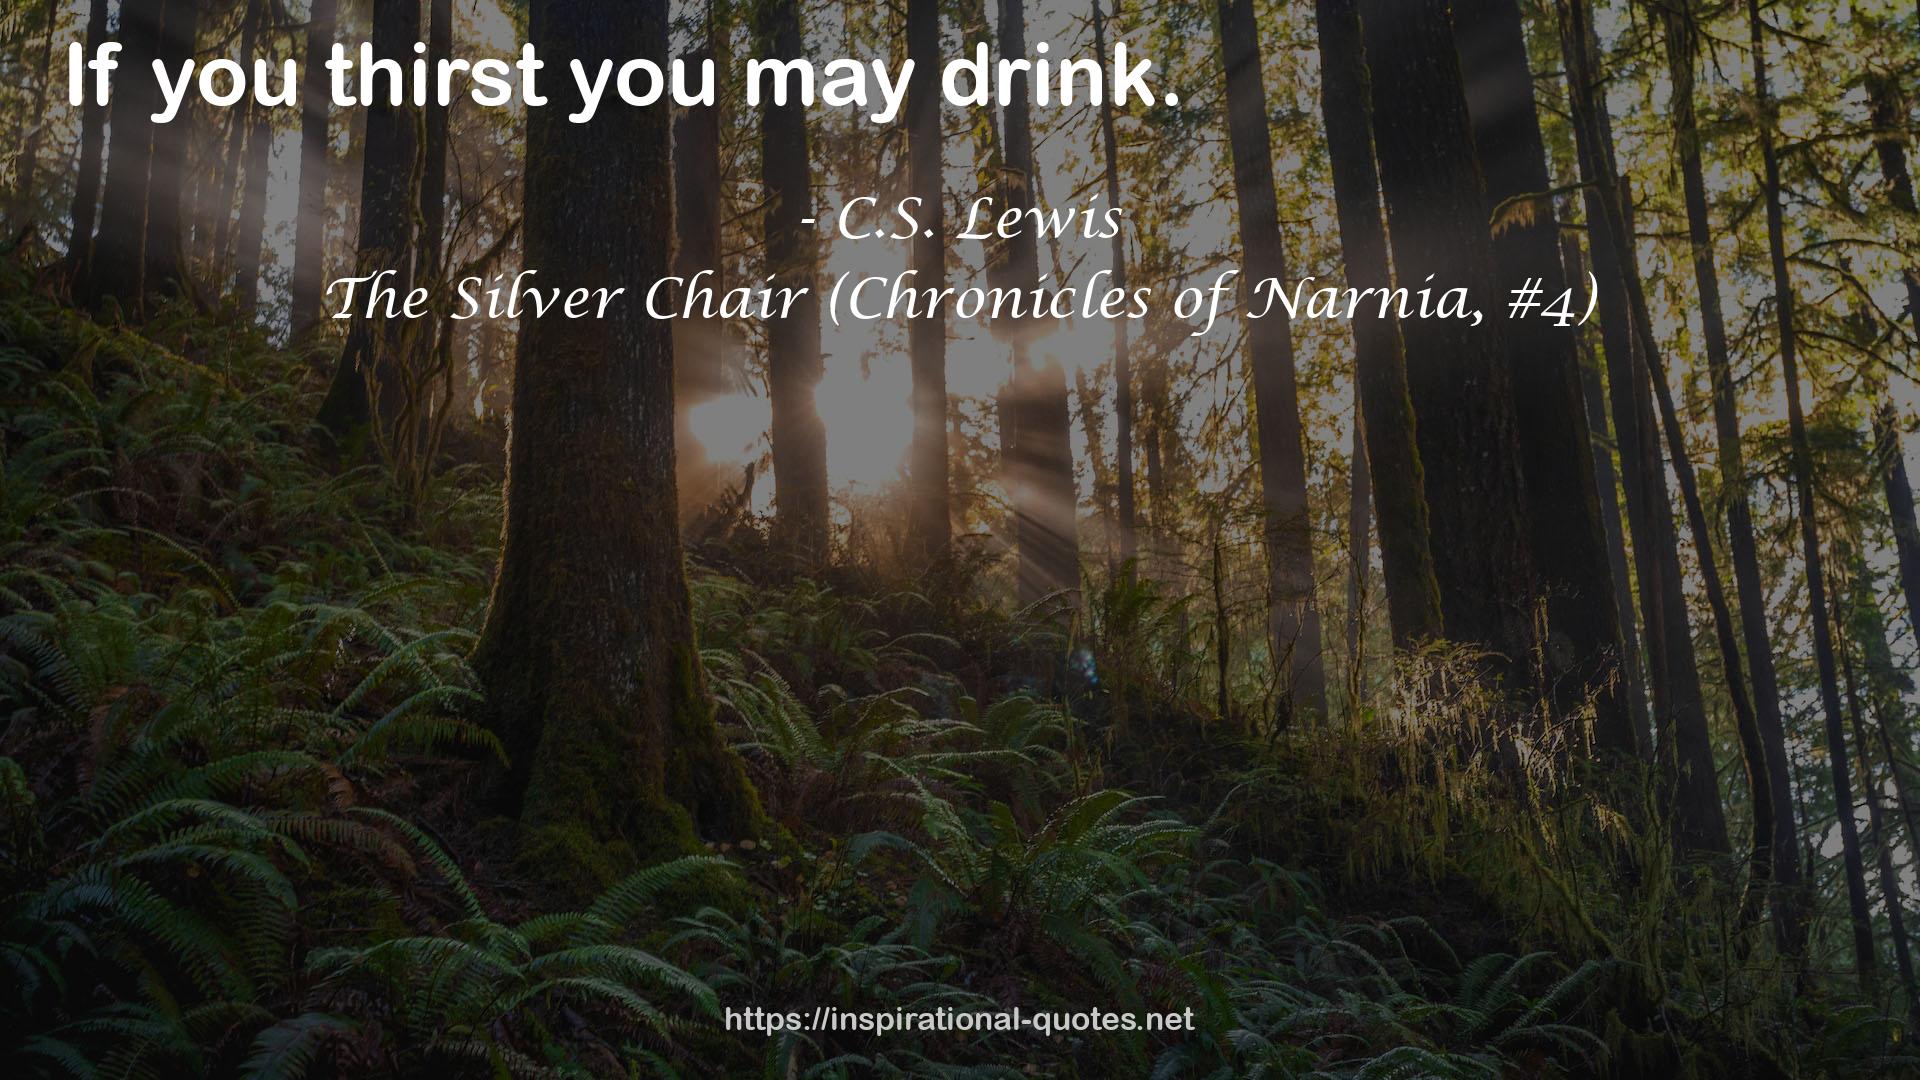 The Silver Chair (Chronicles of Narnia, #4) QUOTES